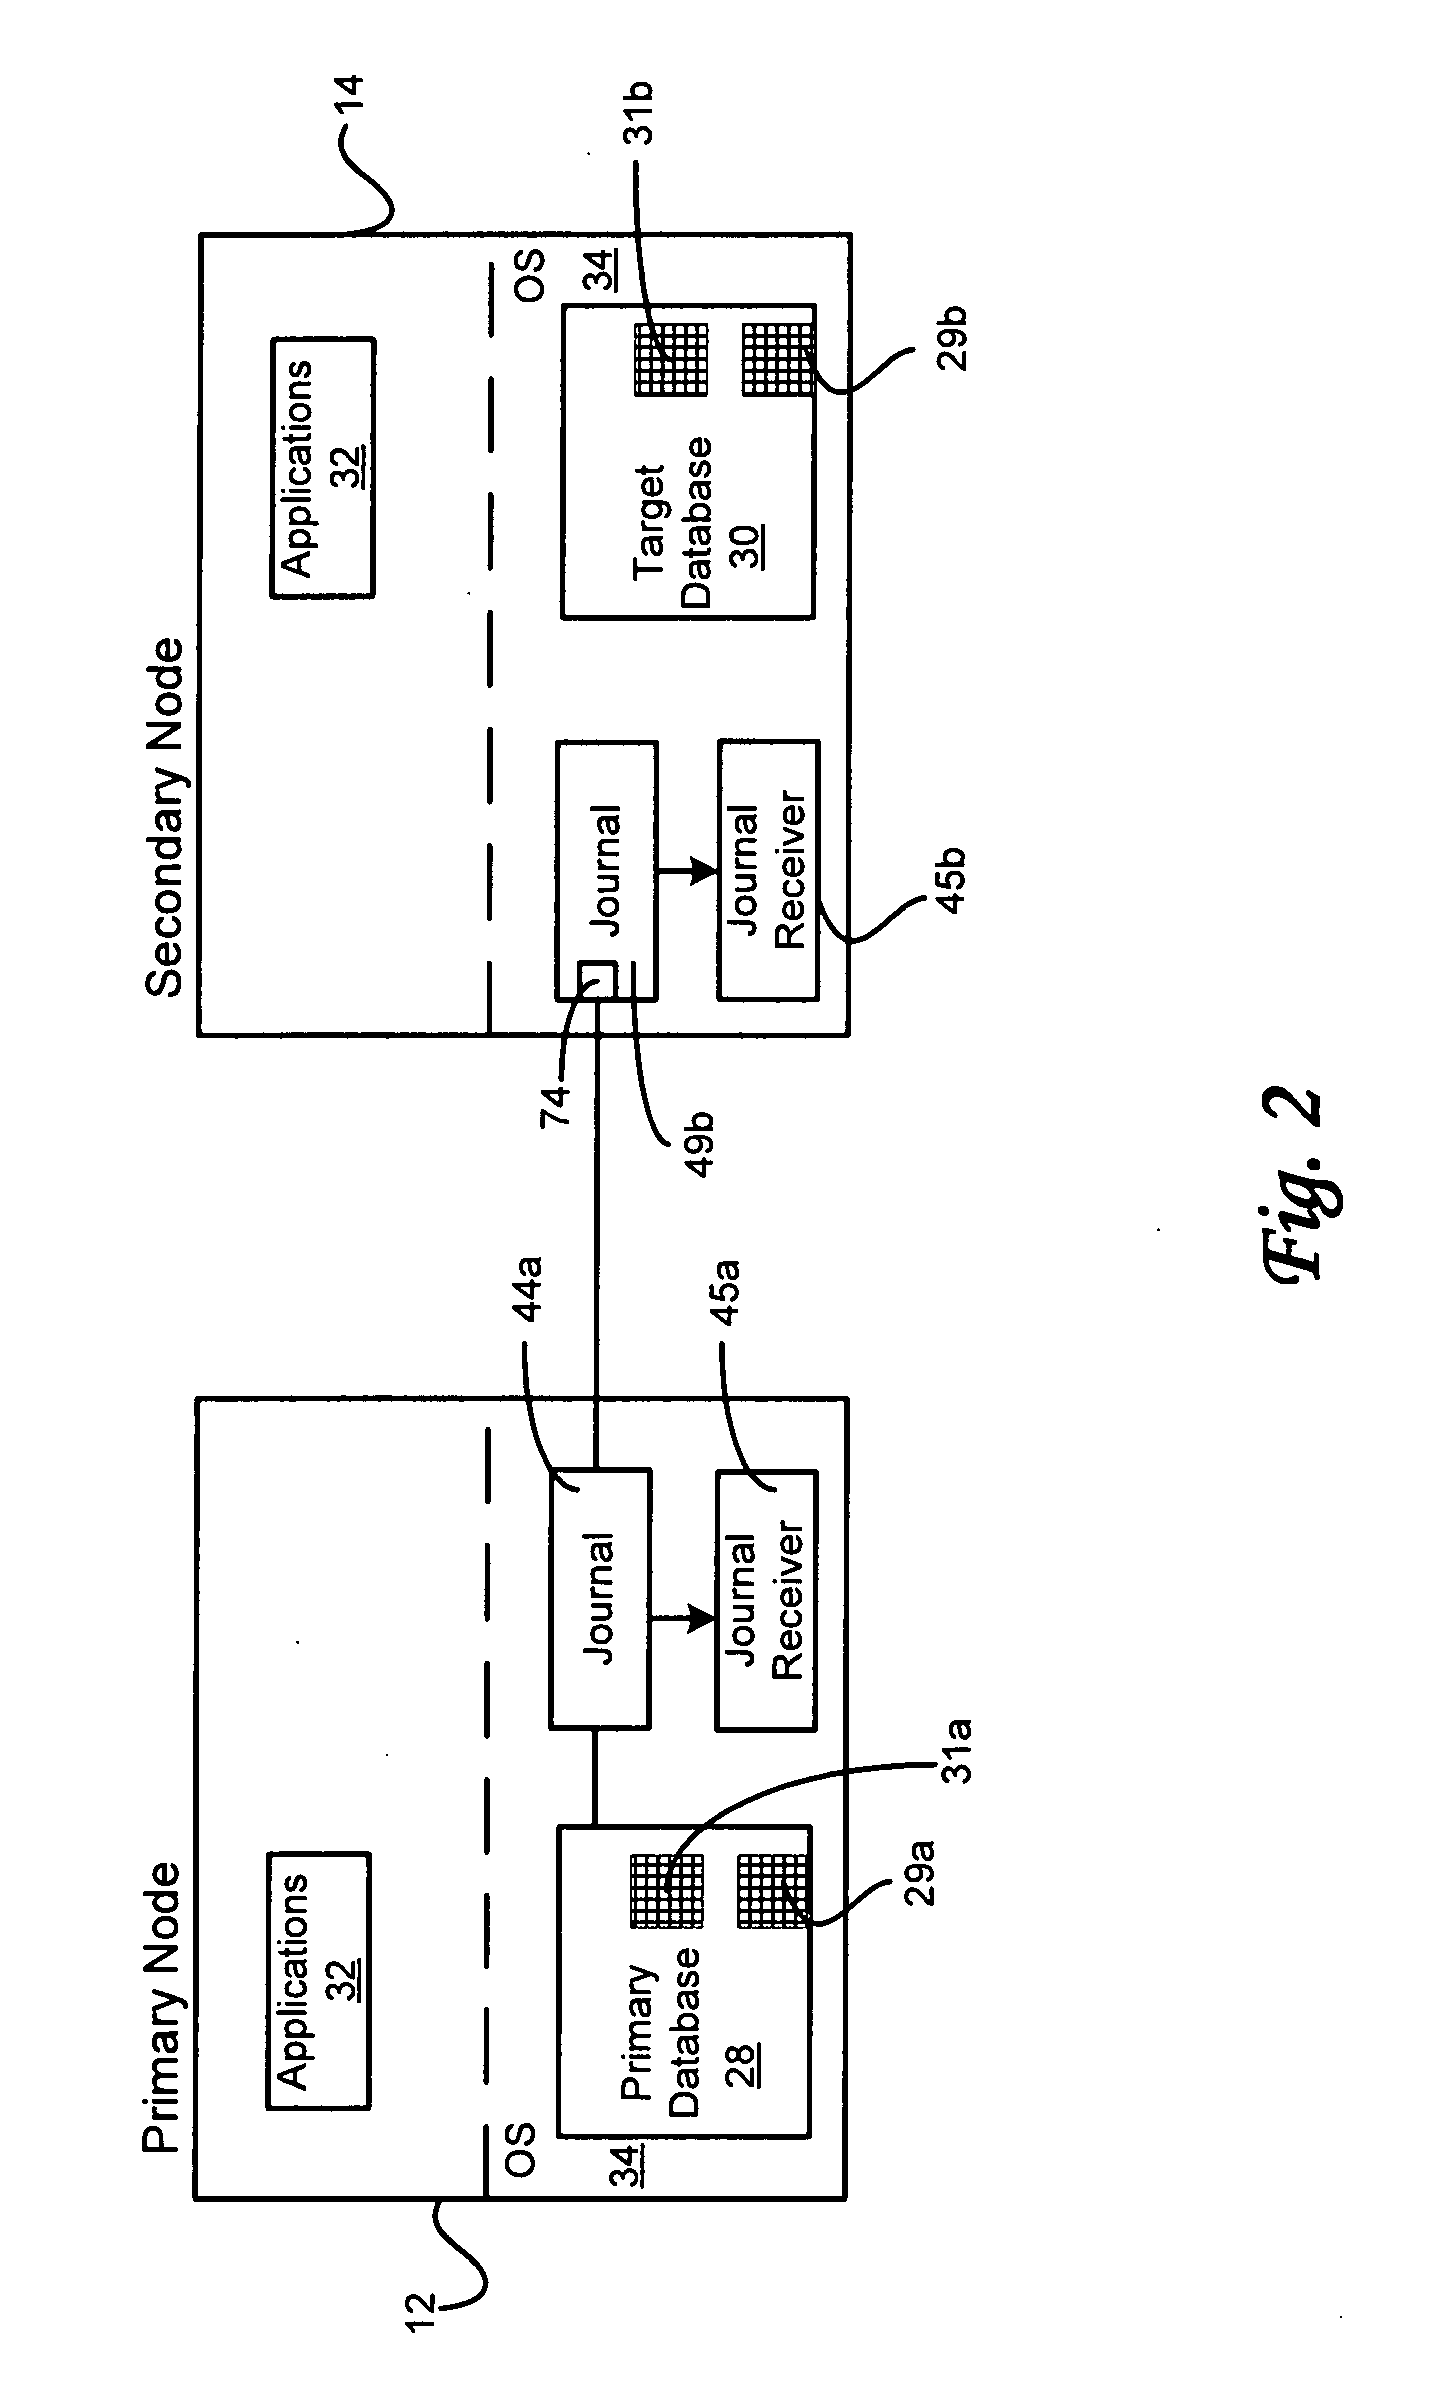 Method for auditing data integrity in a high availability database